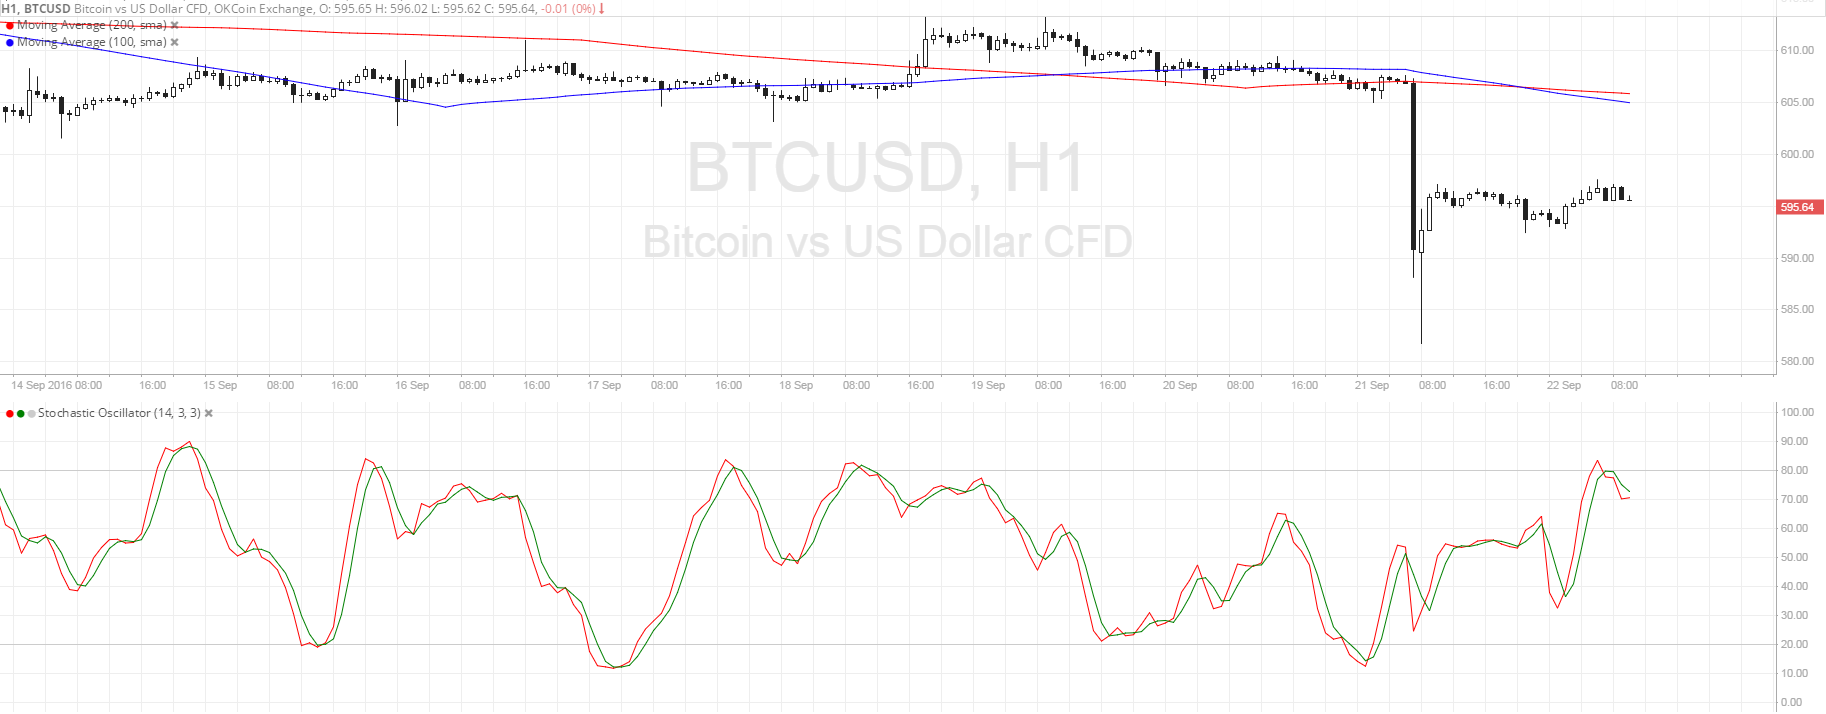 Bitcoin Price Technical Analysis for 09/22/2016 - Selloff Continuation Due?